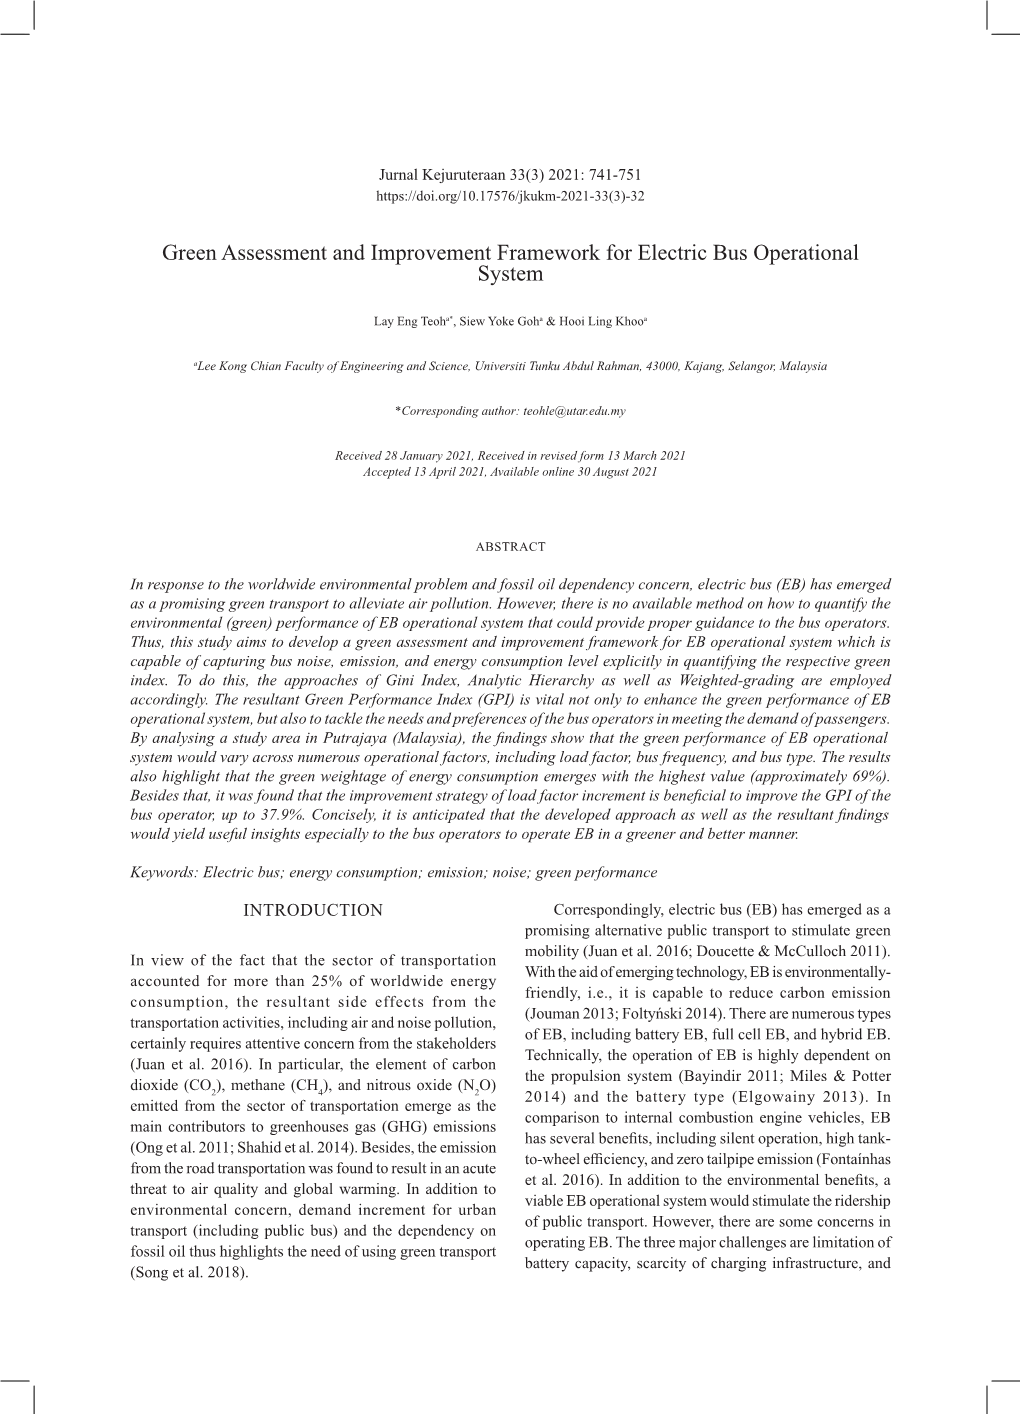 Green Assessment and Improvement Framework for Electric Bus Operational System